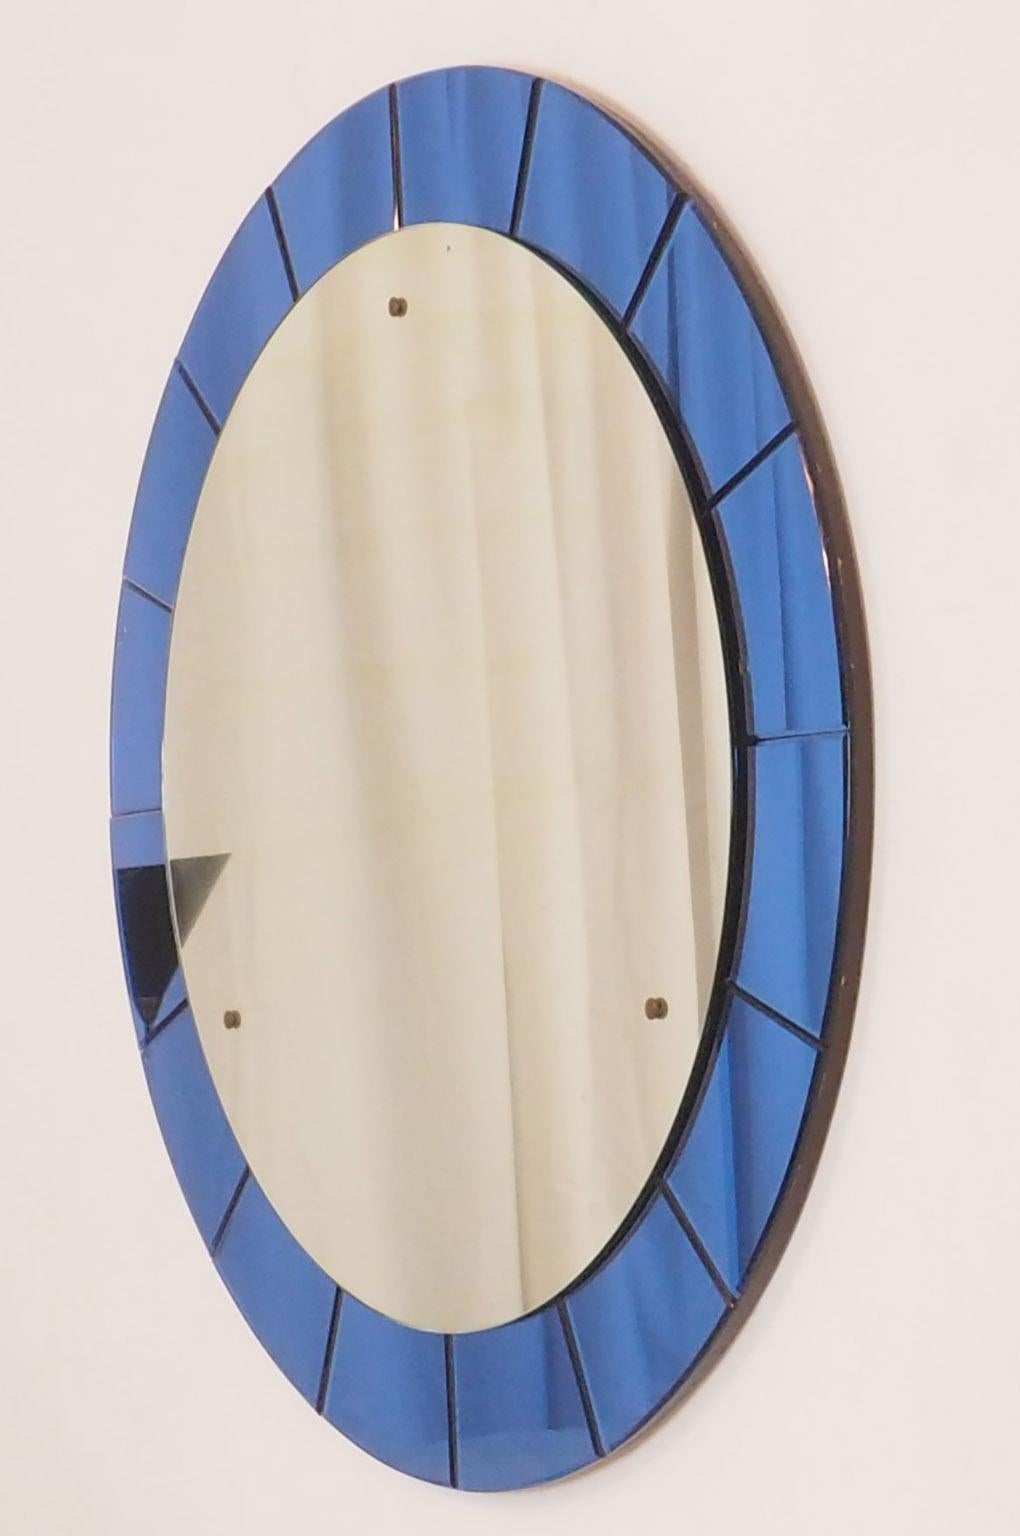 Italian Mid-Century Modern Monumental Blue Round Wall Mirror by Cristal Arte, Italy 1950 For Sale